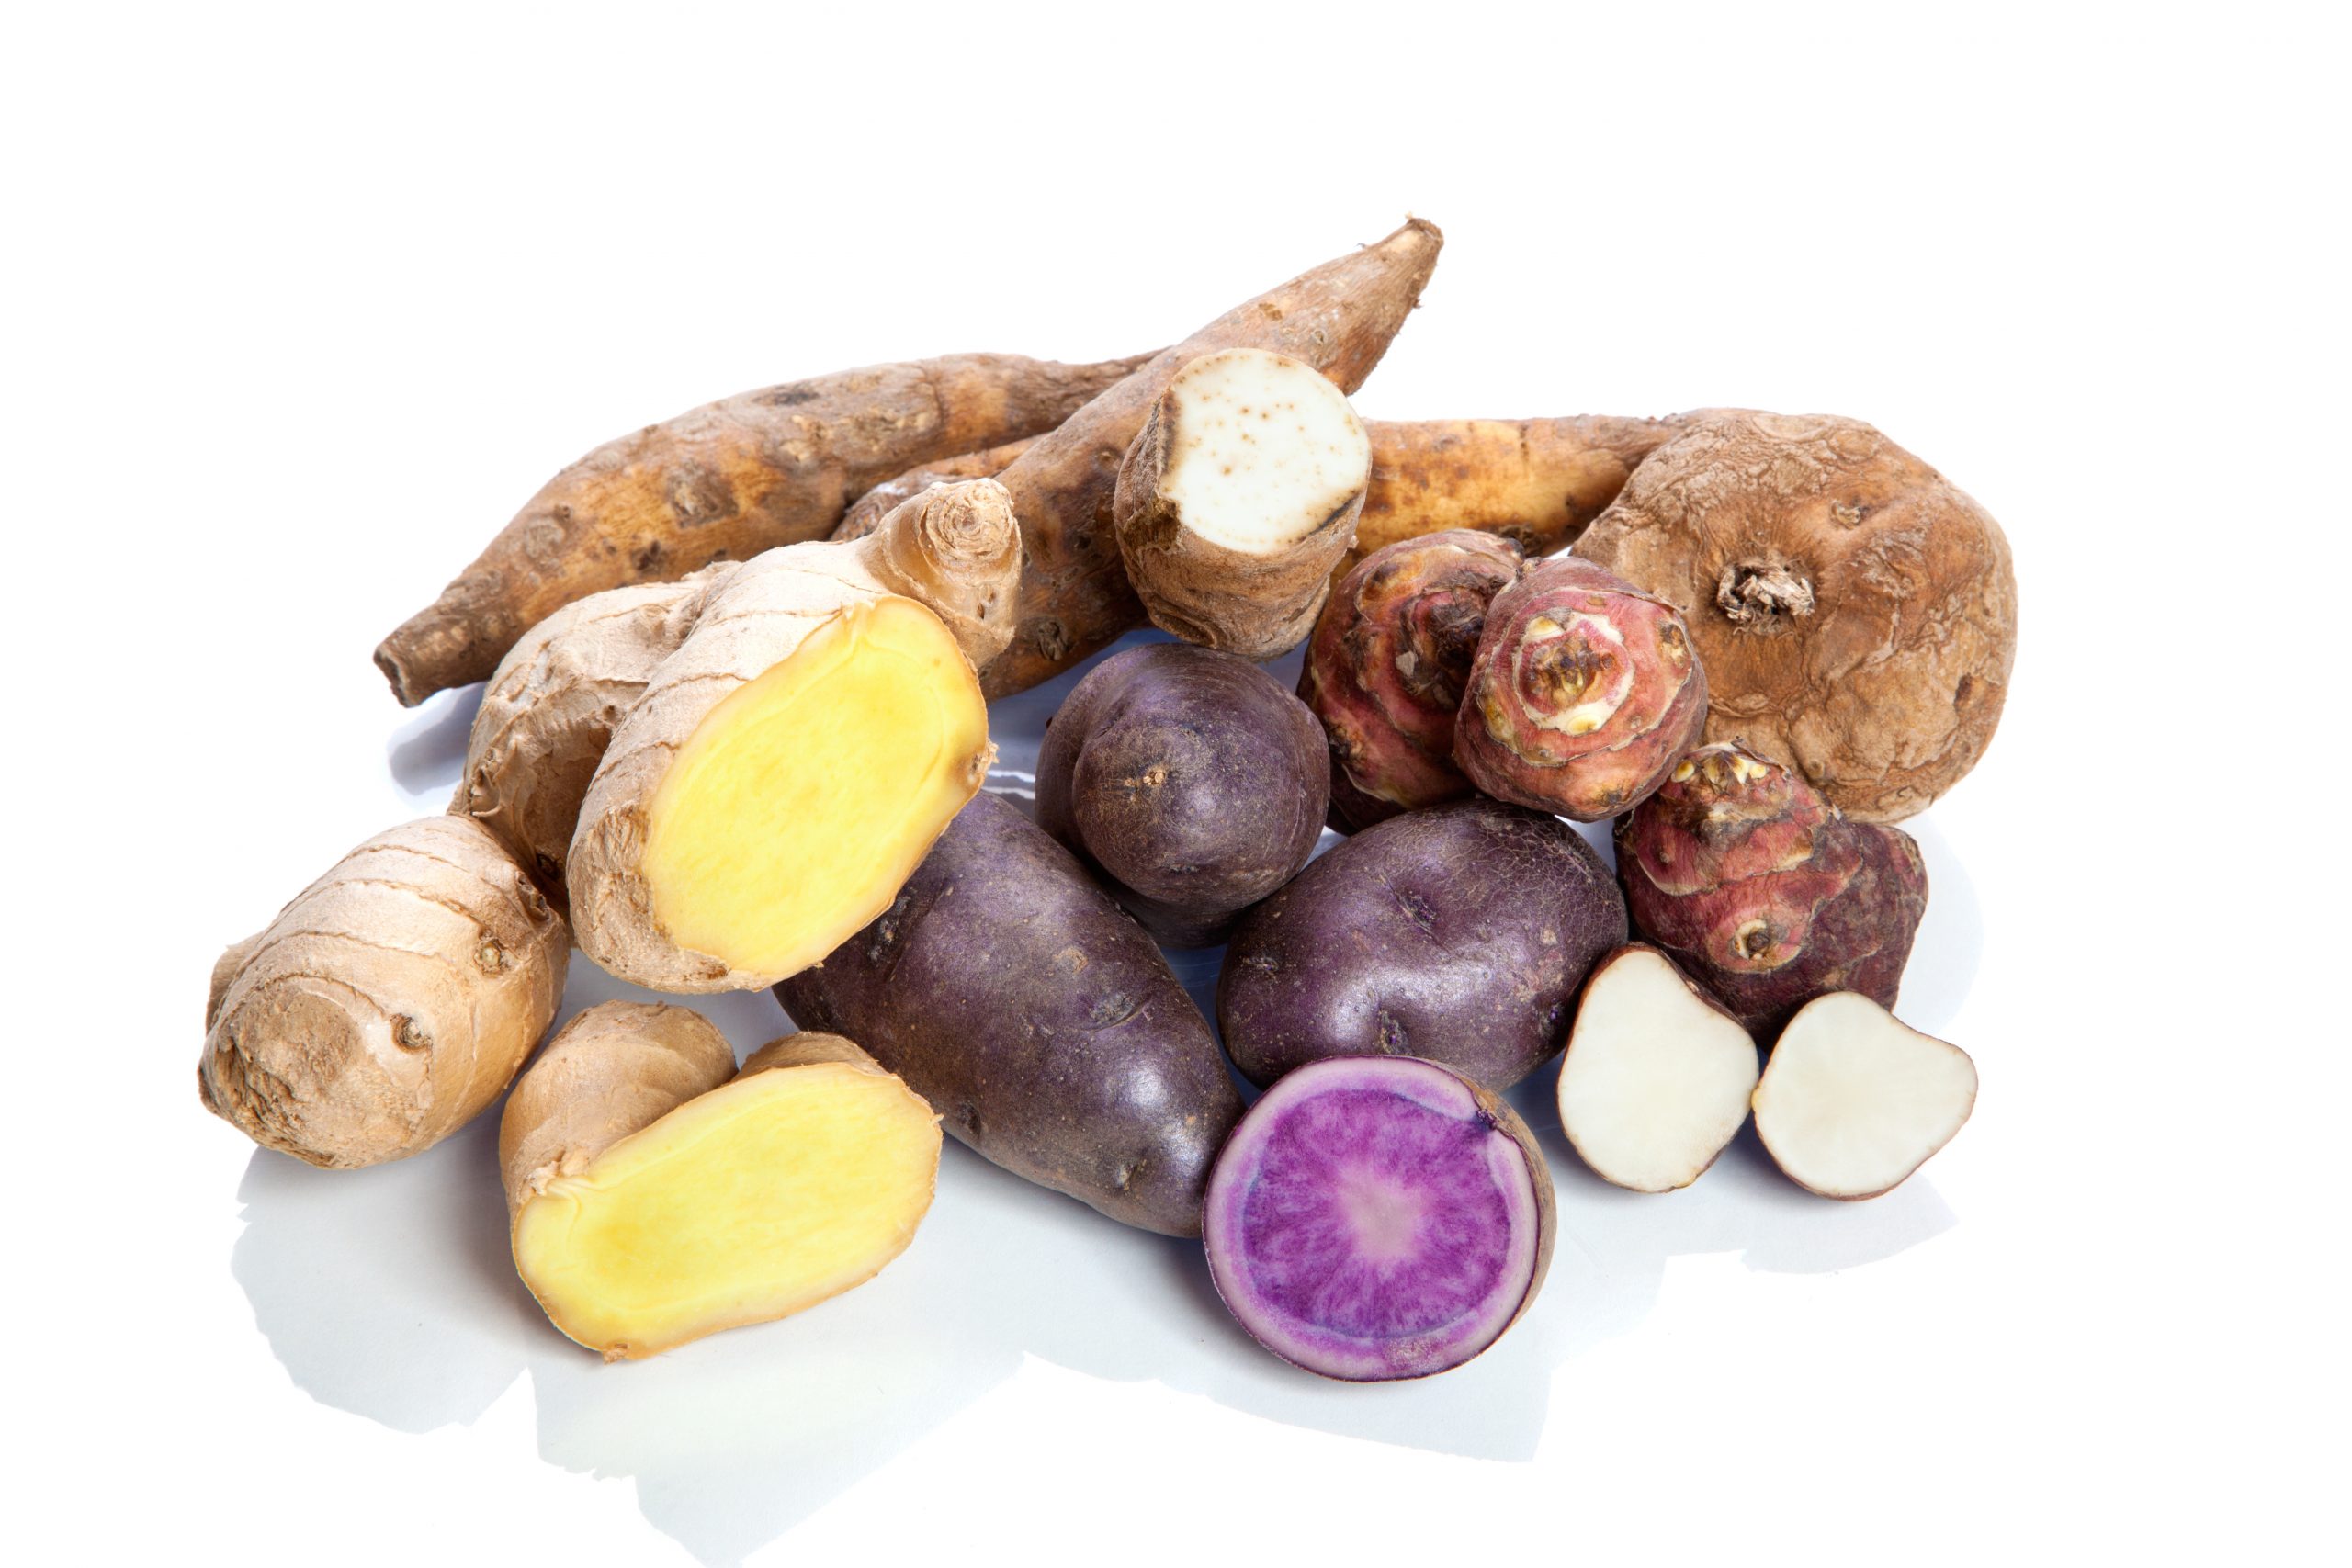 Roasted Root Vegetables with Manuka Honey